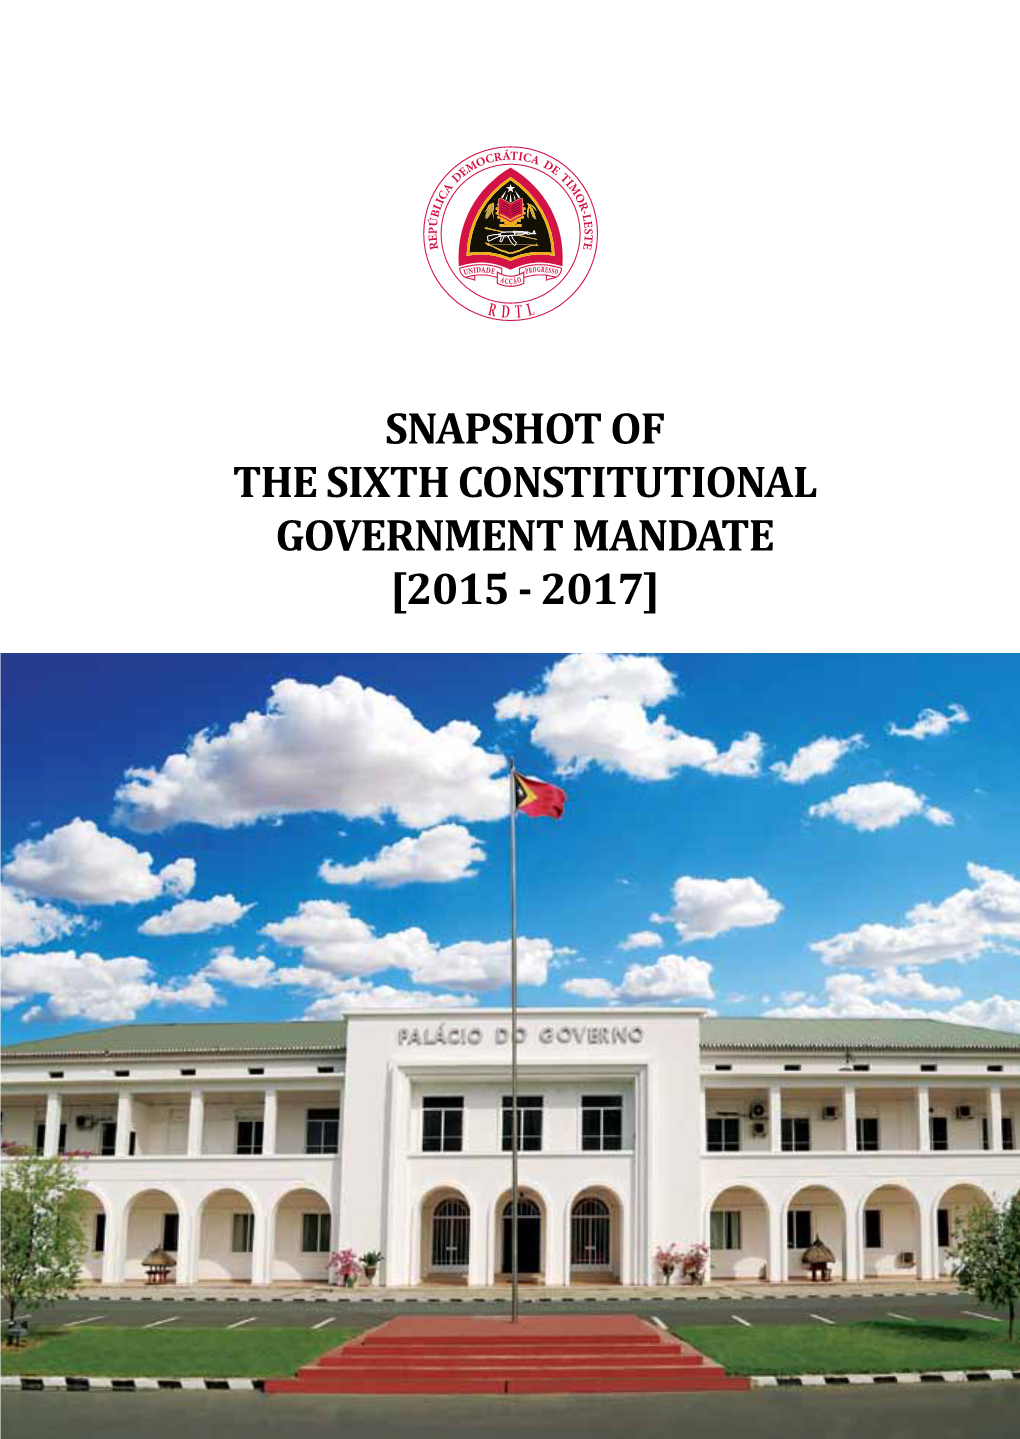 Snapshot of the Sixth Constitutional Government Mandate [2015 - 2017] Snapshot of the Sixth Constitutional Government Mandate [2015 - 2017]